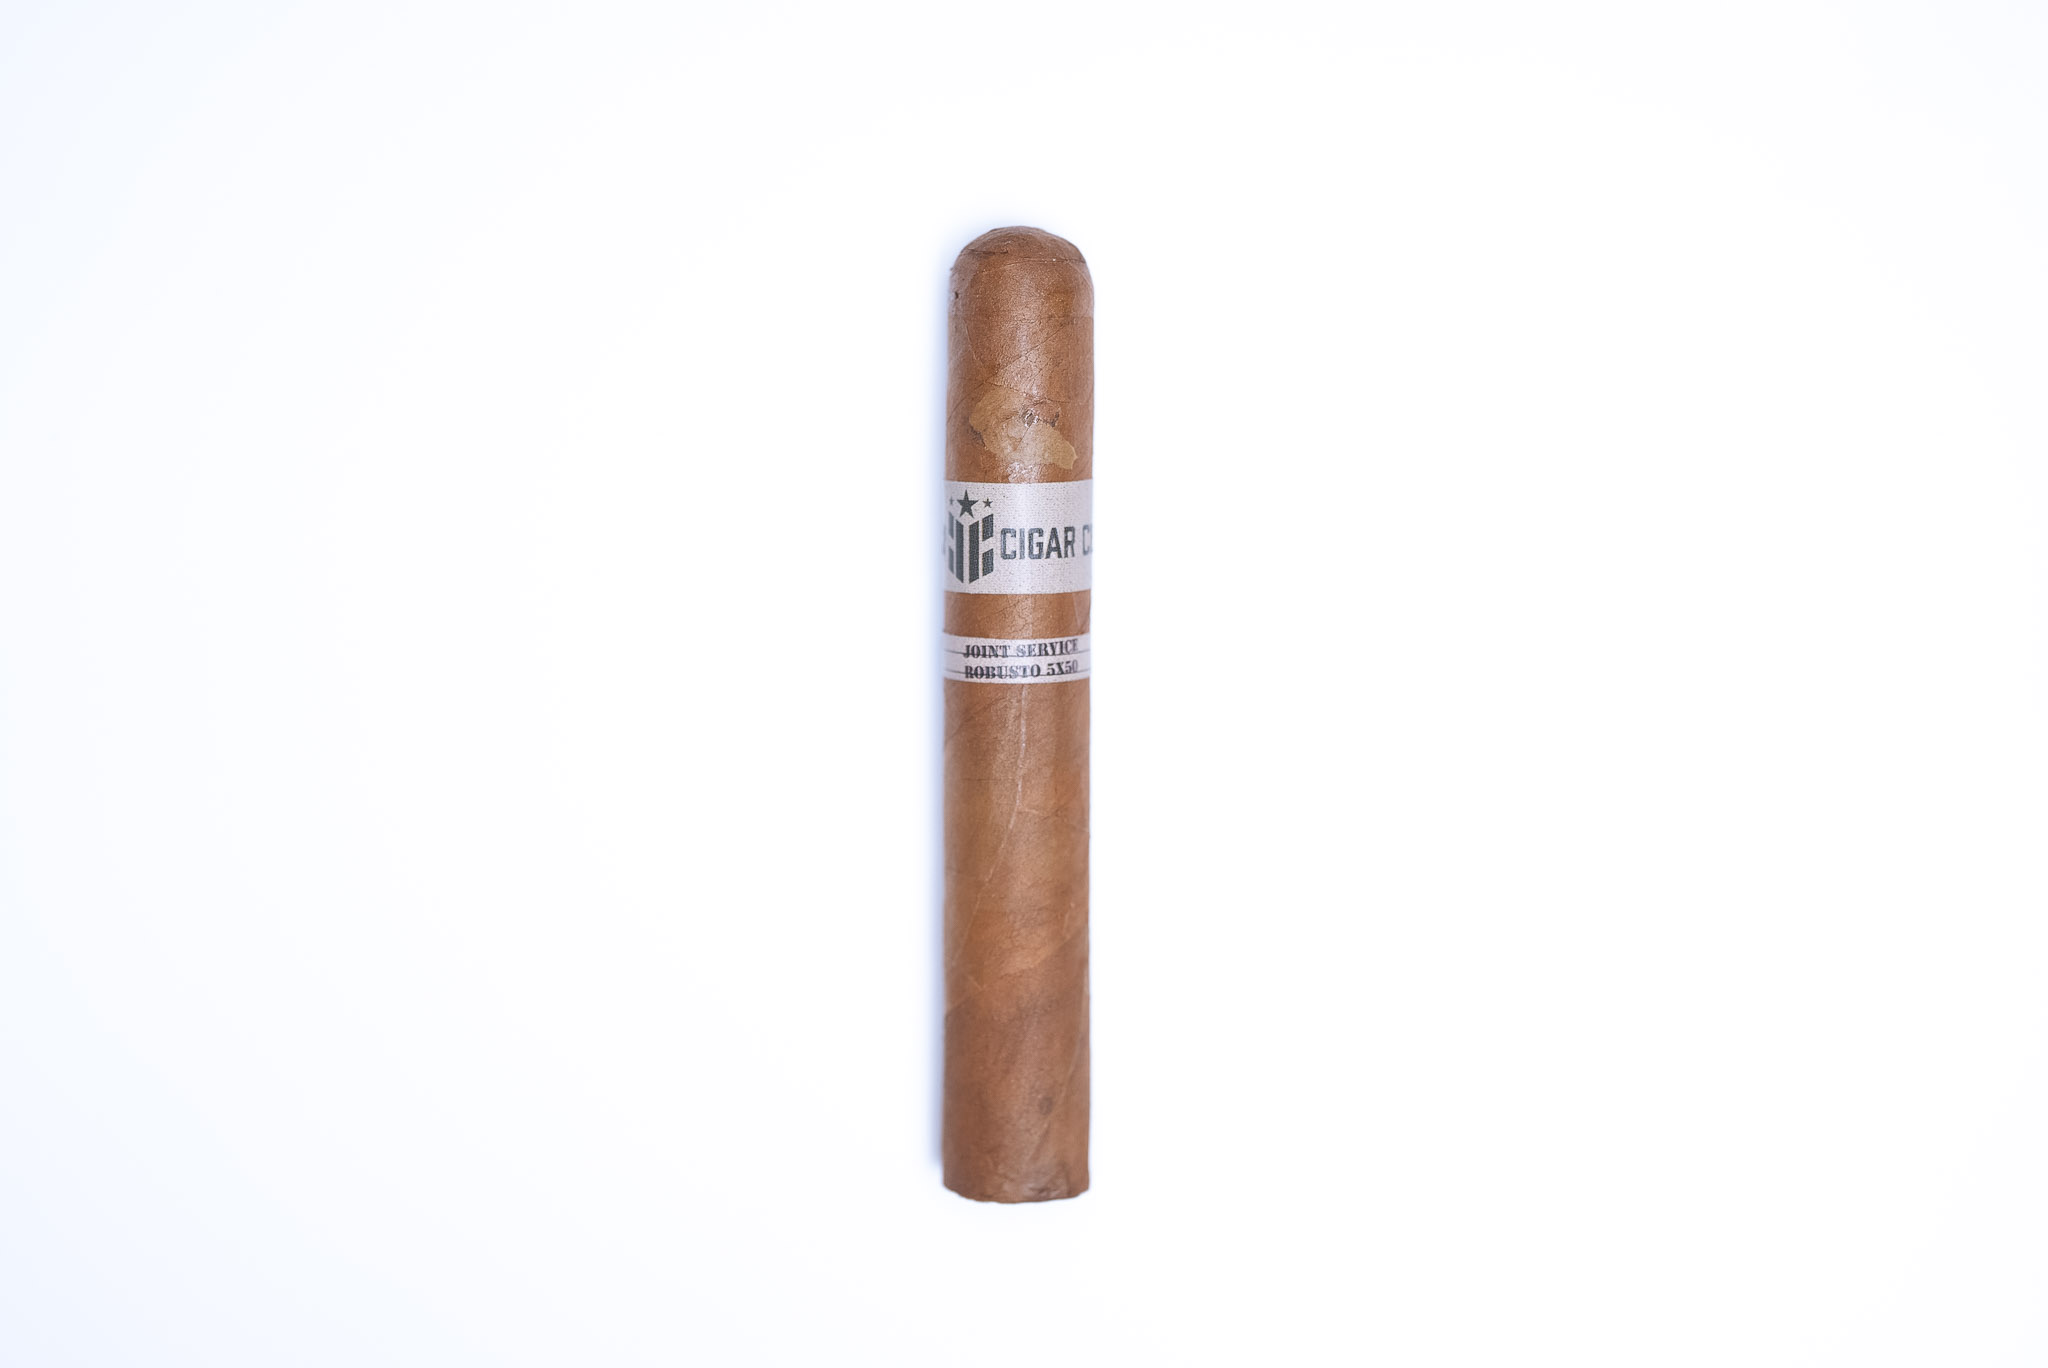 Caliber Cigar Co. Joint Service Robusto Aged 10 Months